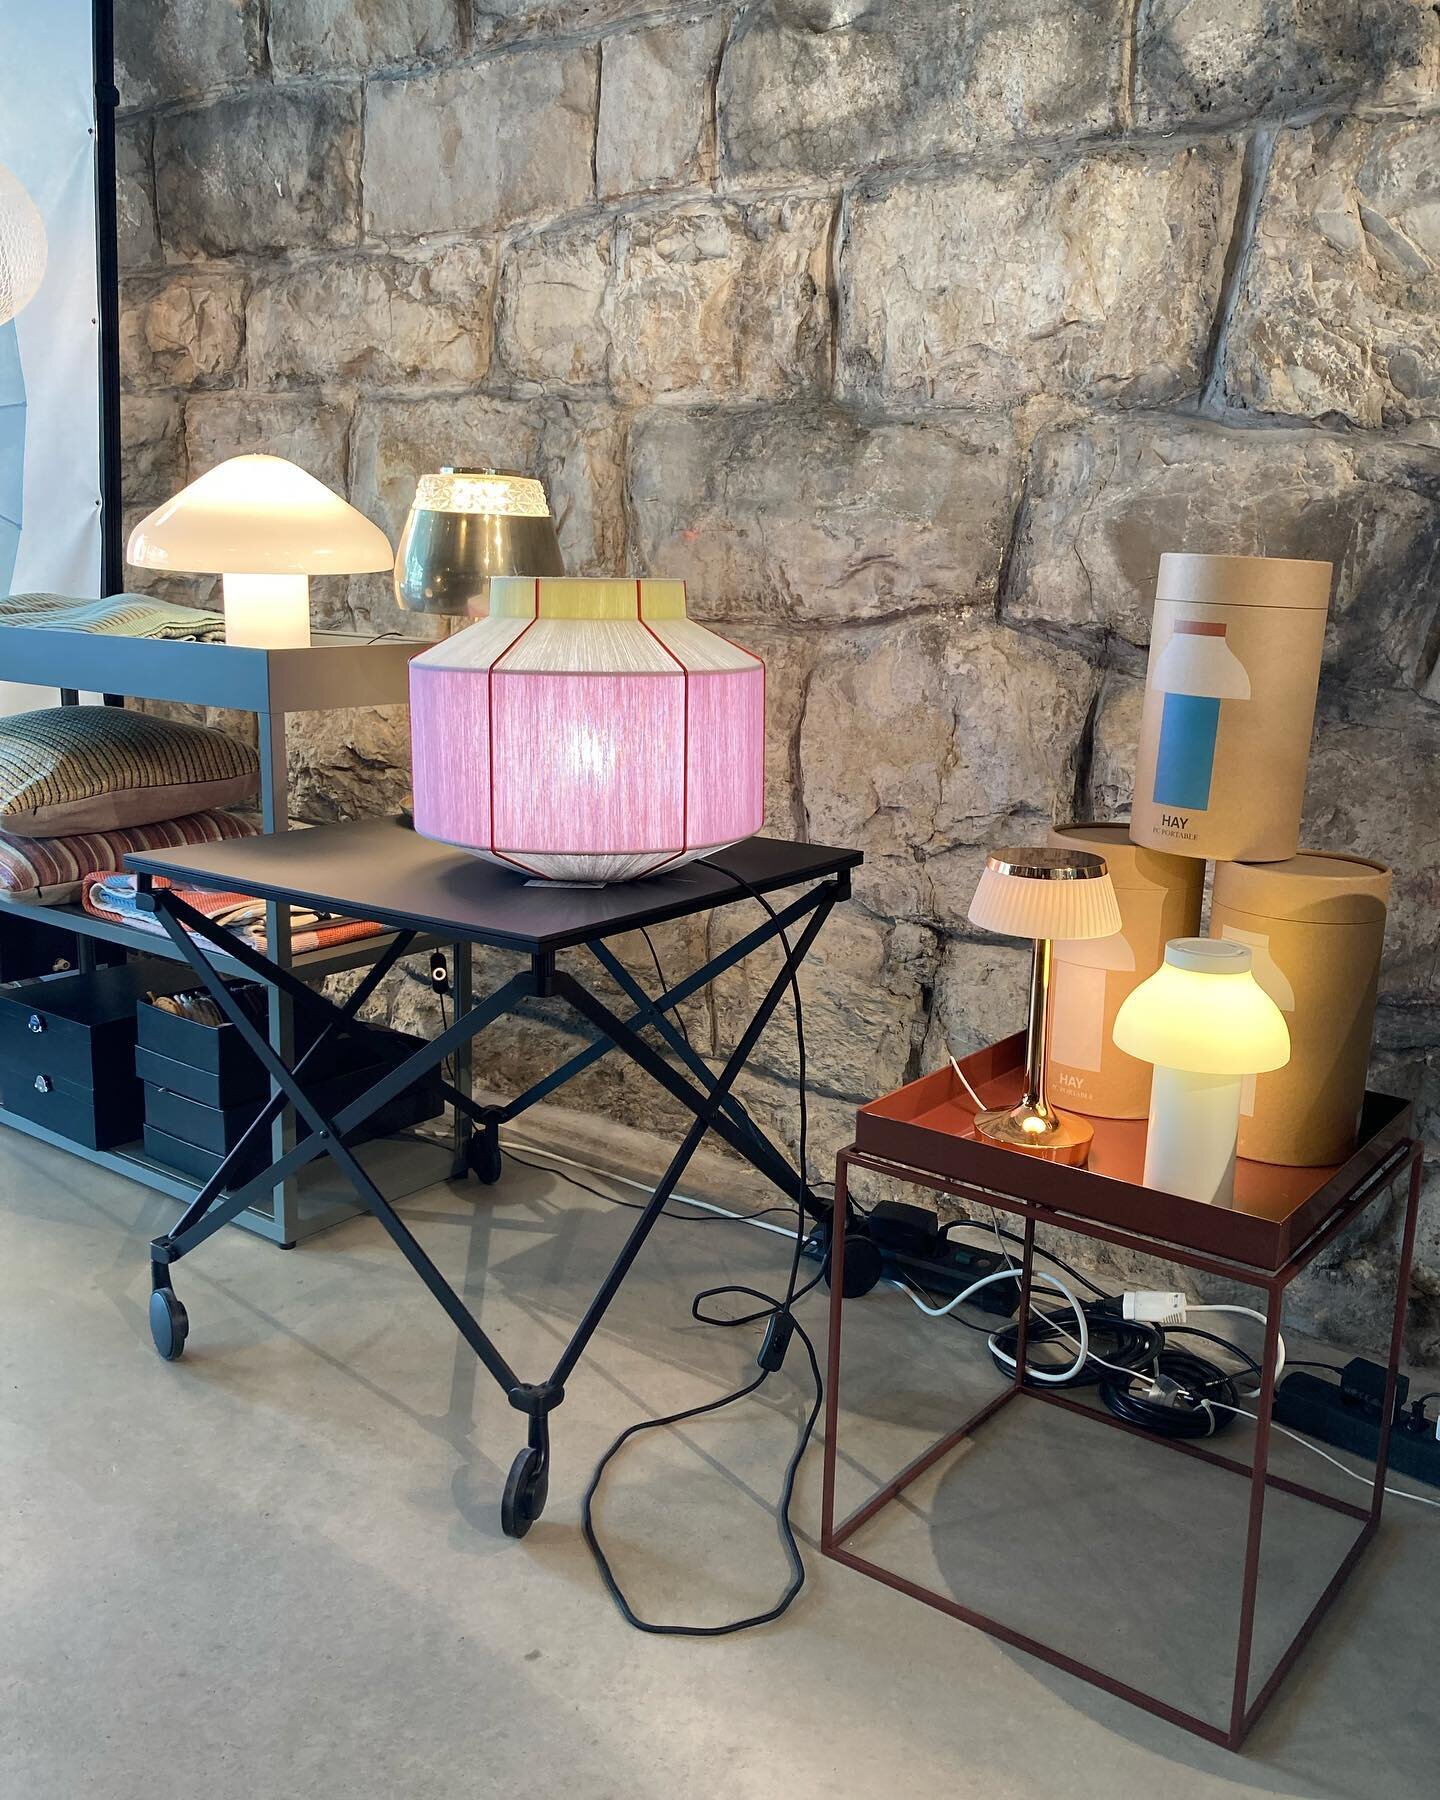 In - and outdoor lamps 💡 
Check out our wide selection! 

#thechair #imviadukt #thechairimviadukt #shopping #indoor #outdoor #lamps #furnituredesign